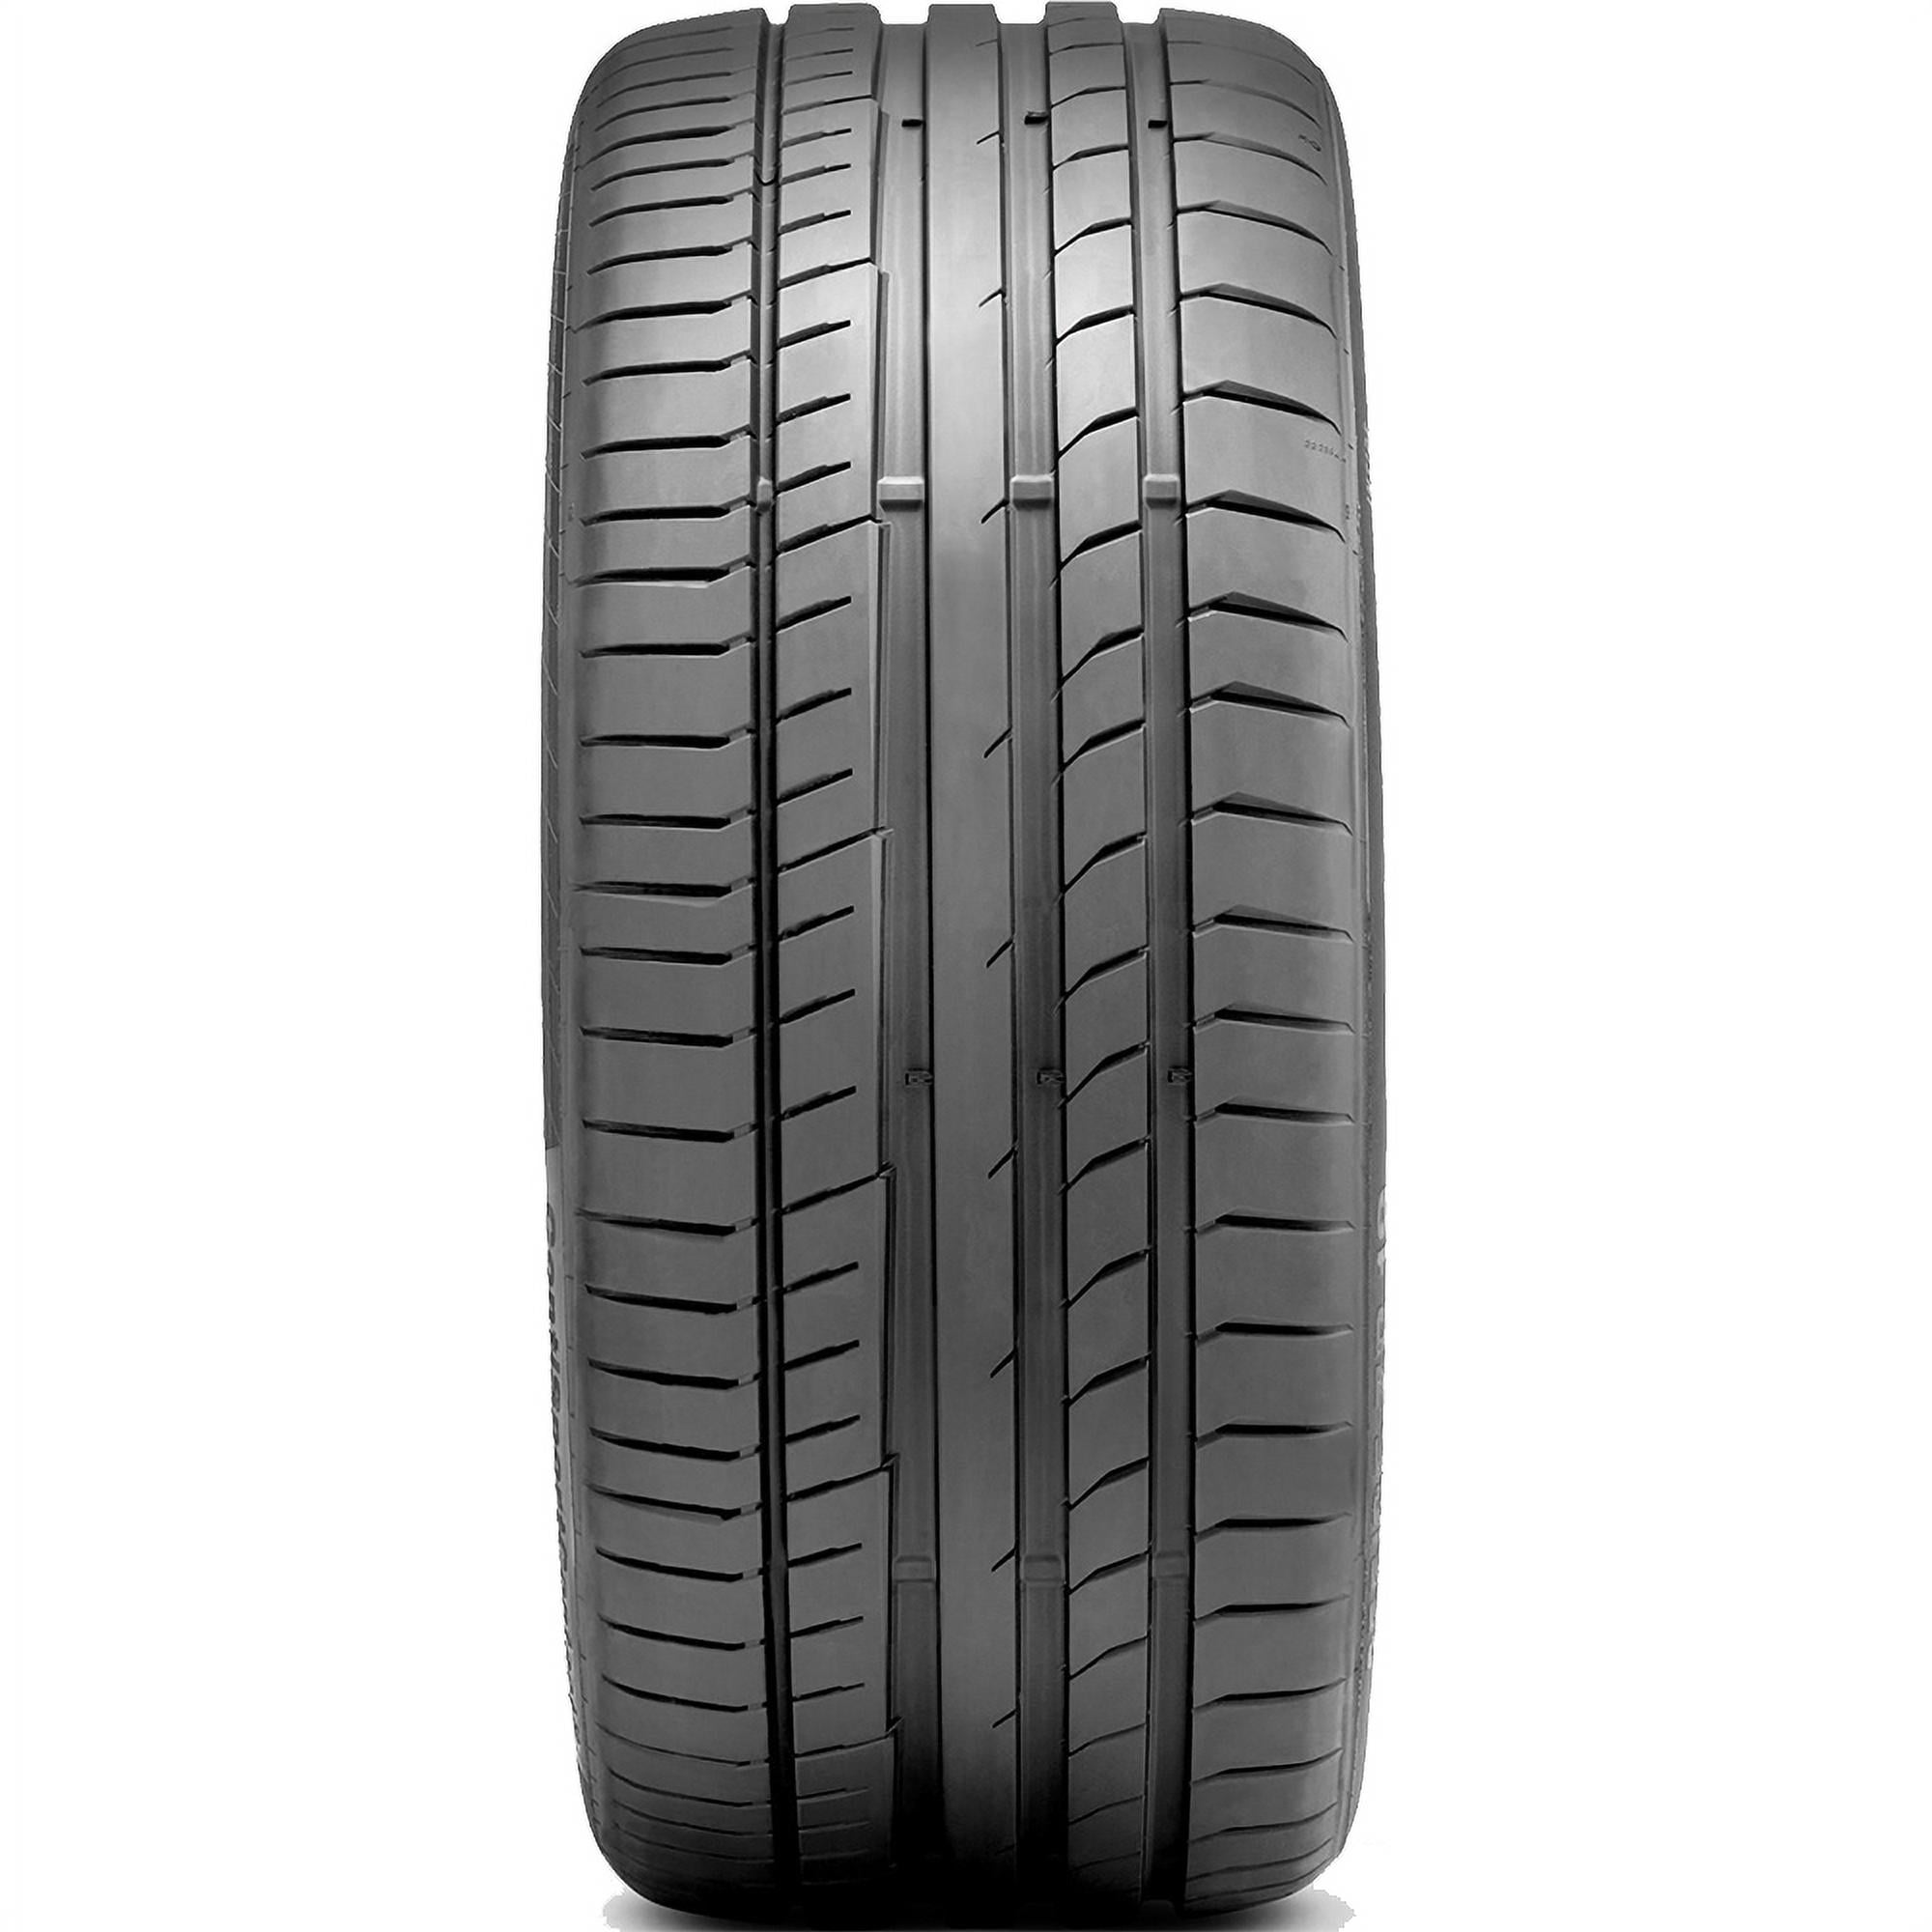 Continental ContiSportContact 5P Passenger Tire XL Summer 235/35R19 91Y